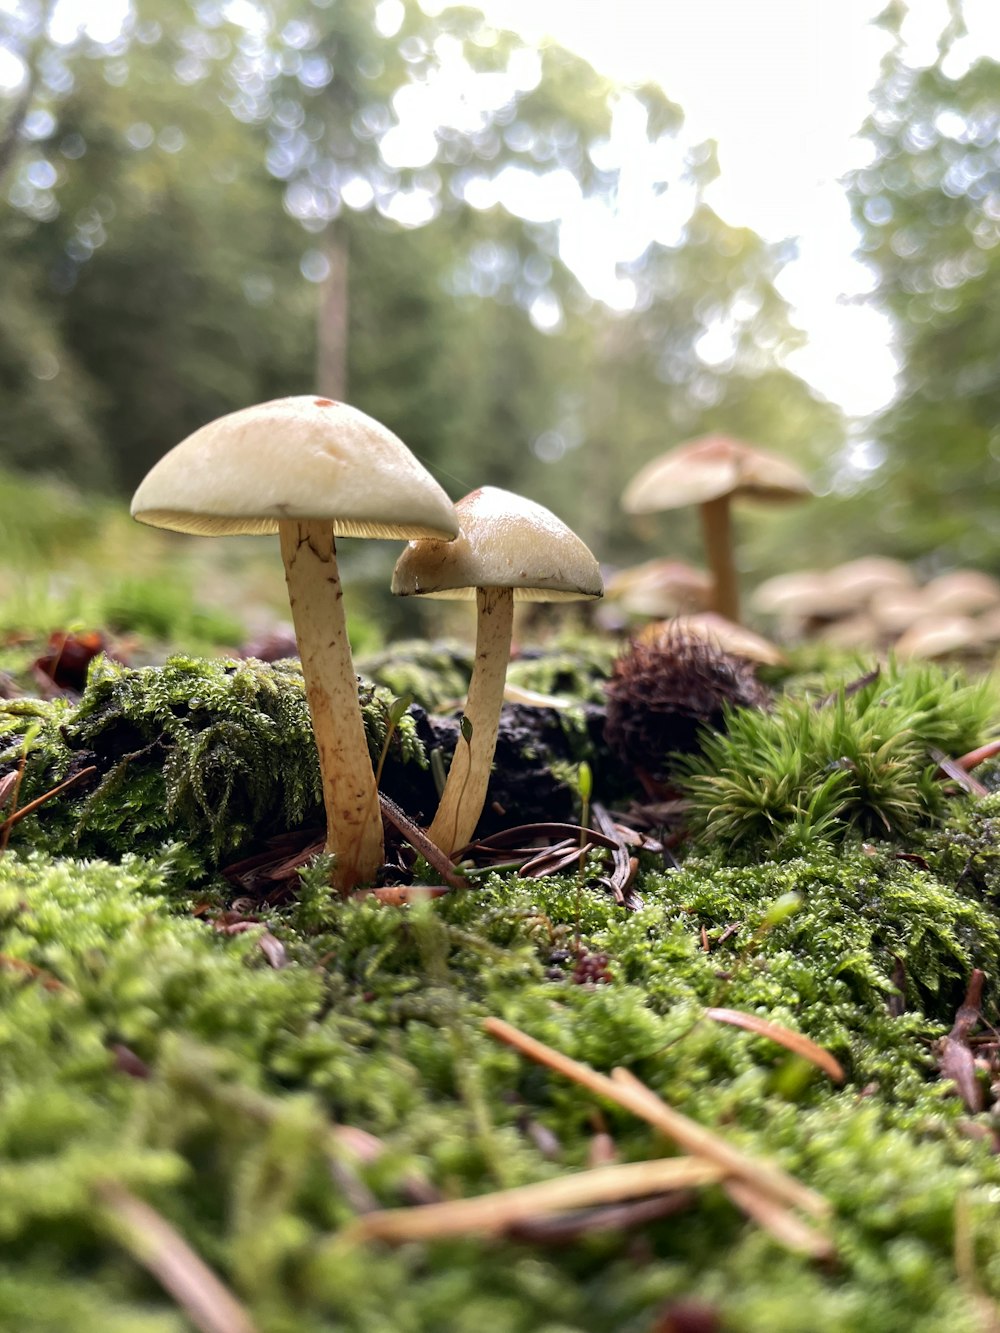 a group of mushrooms growing in a forest